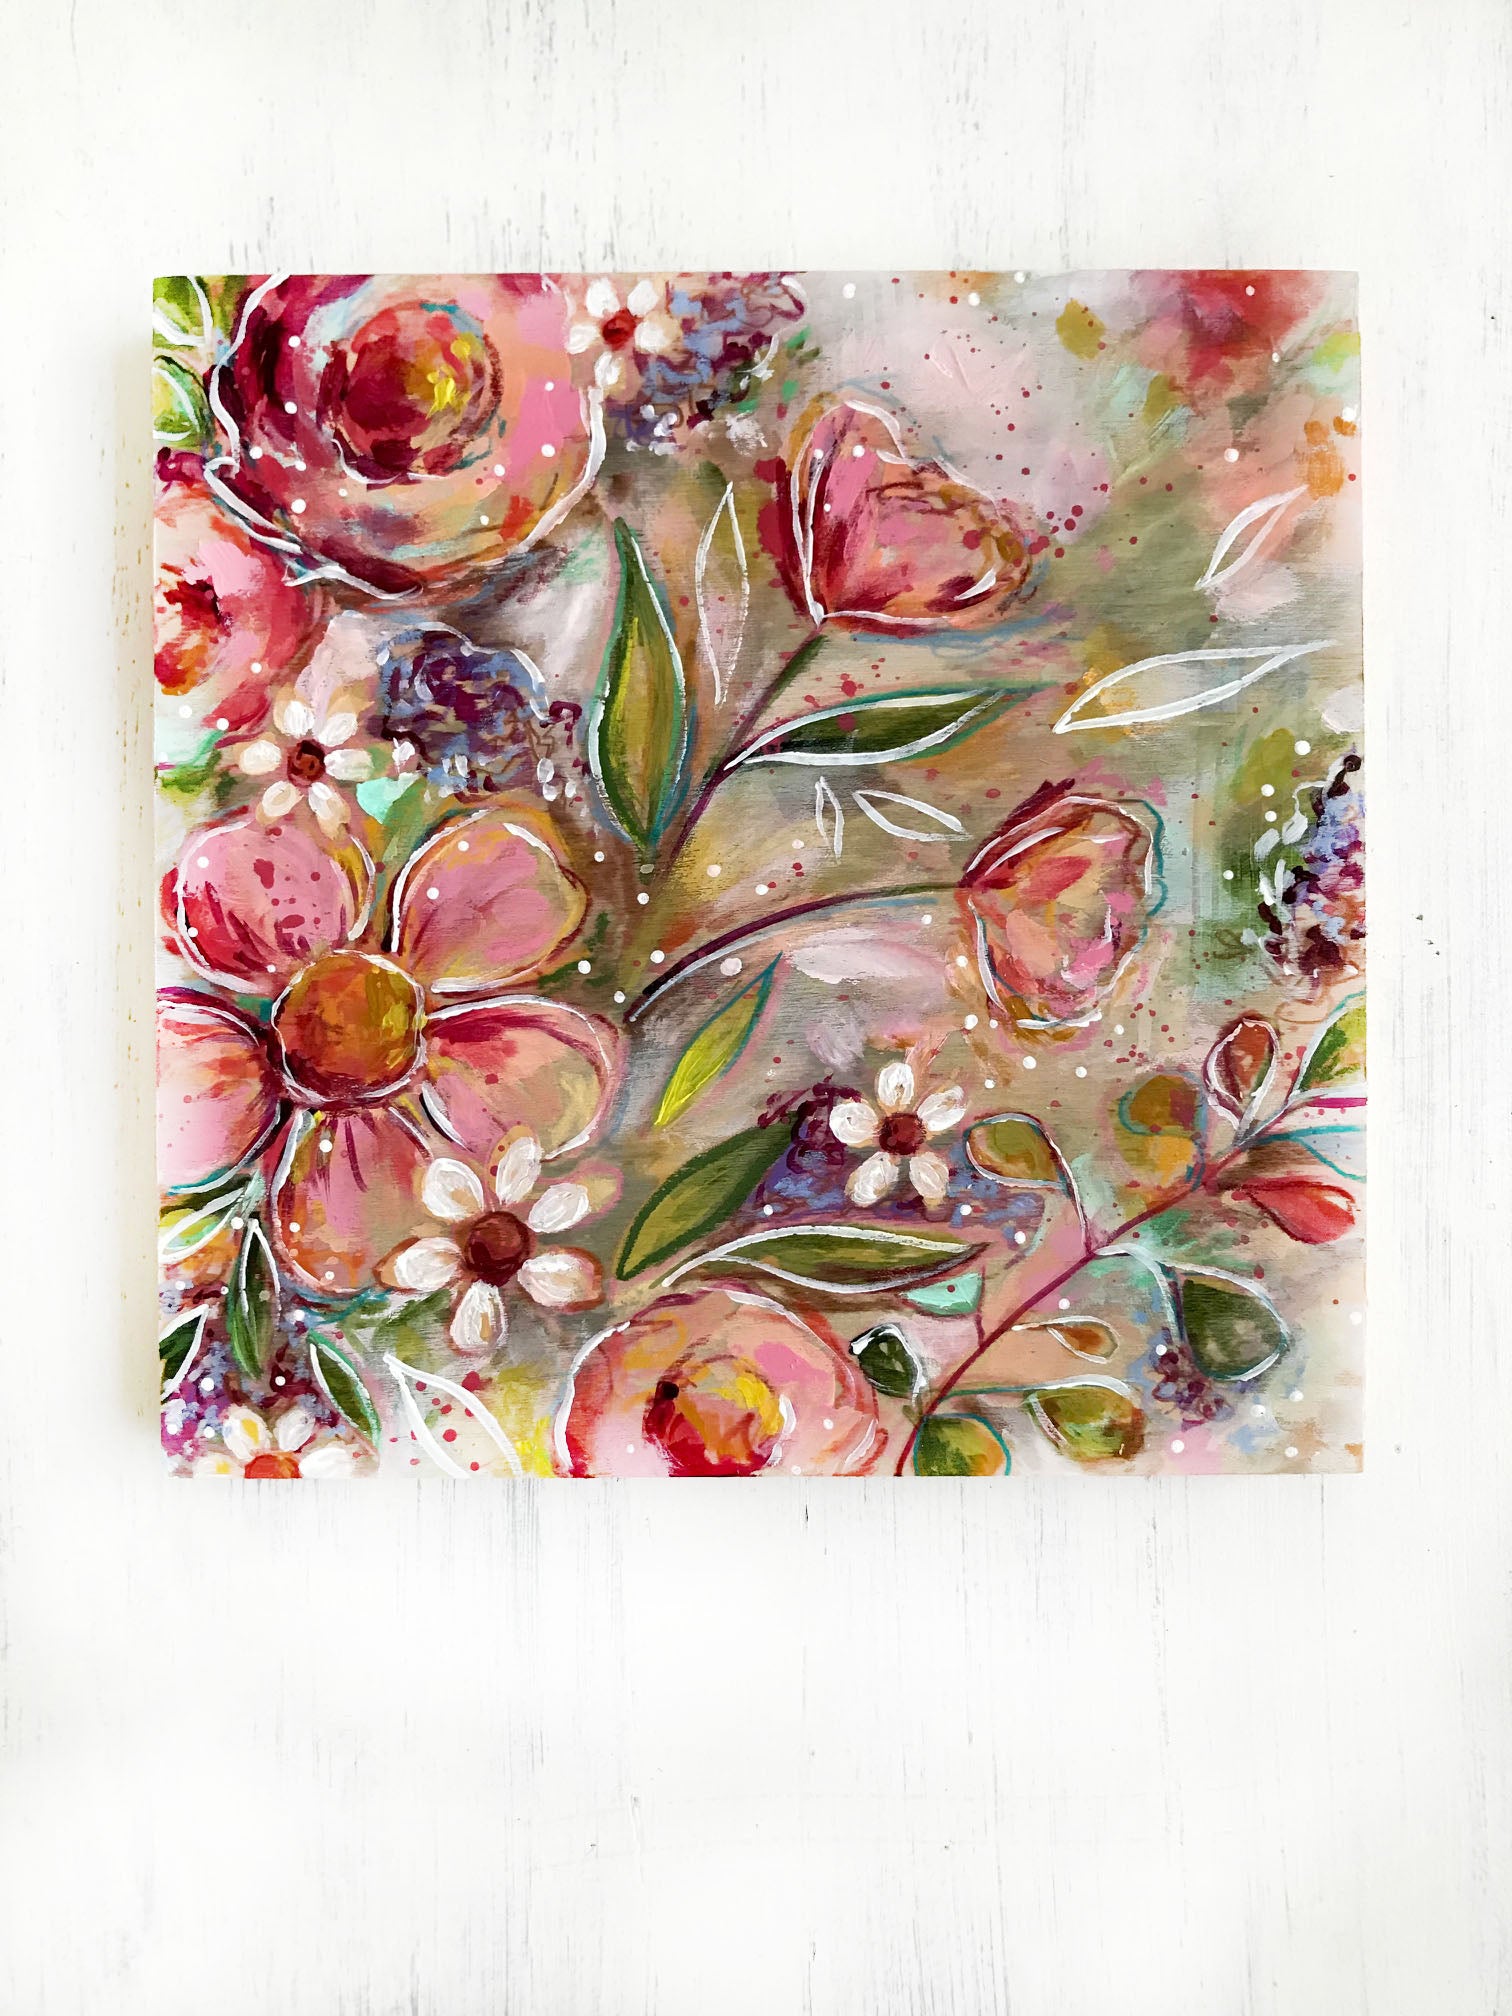 New Spring Floral Mixed Media Painting on 8x8 inch wood panel no.9 - Bethany Joy Art